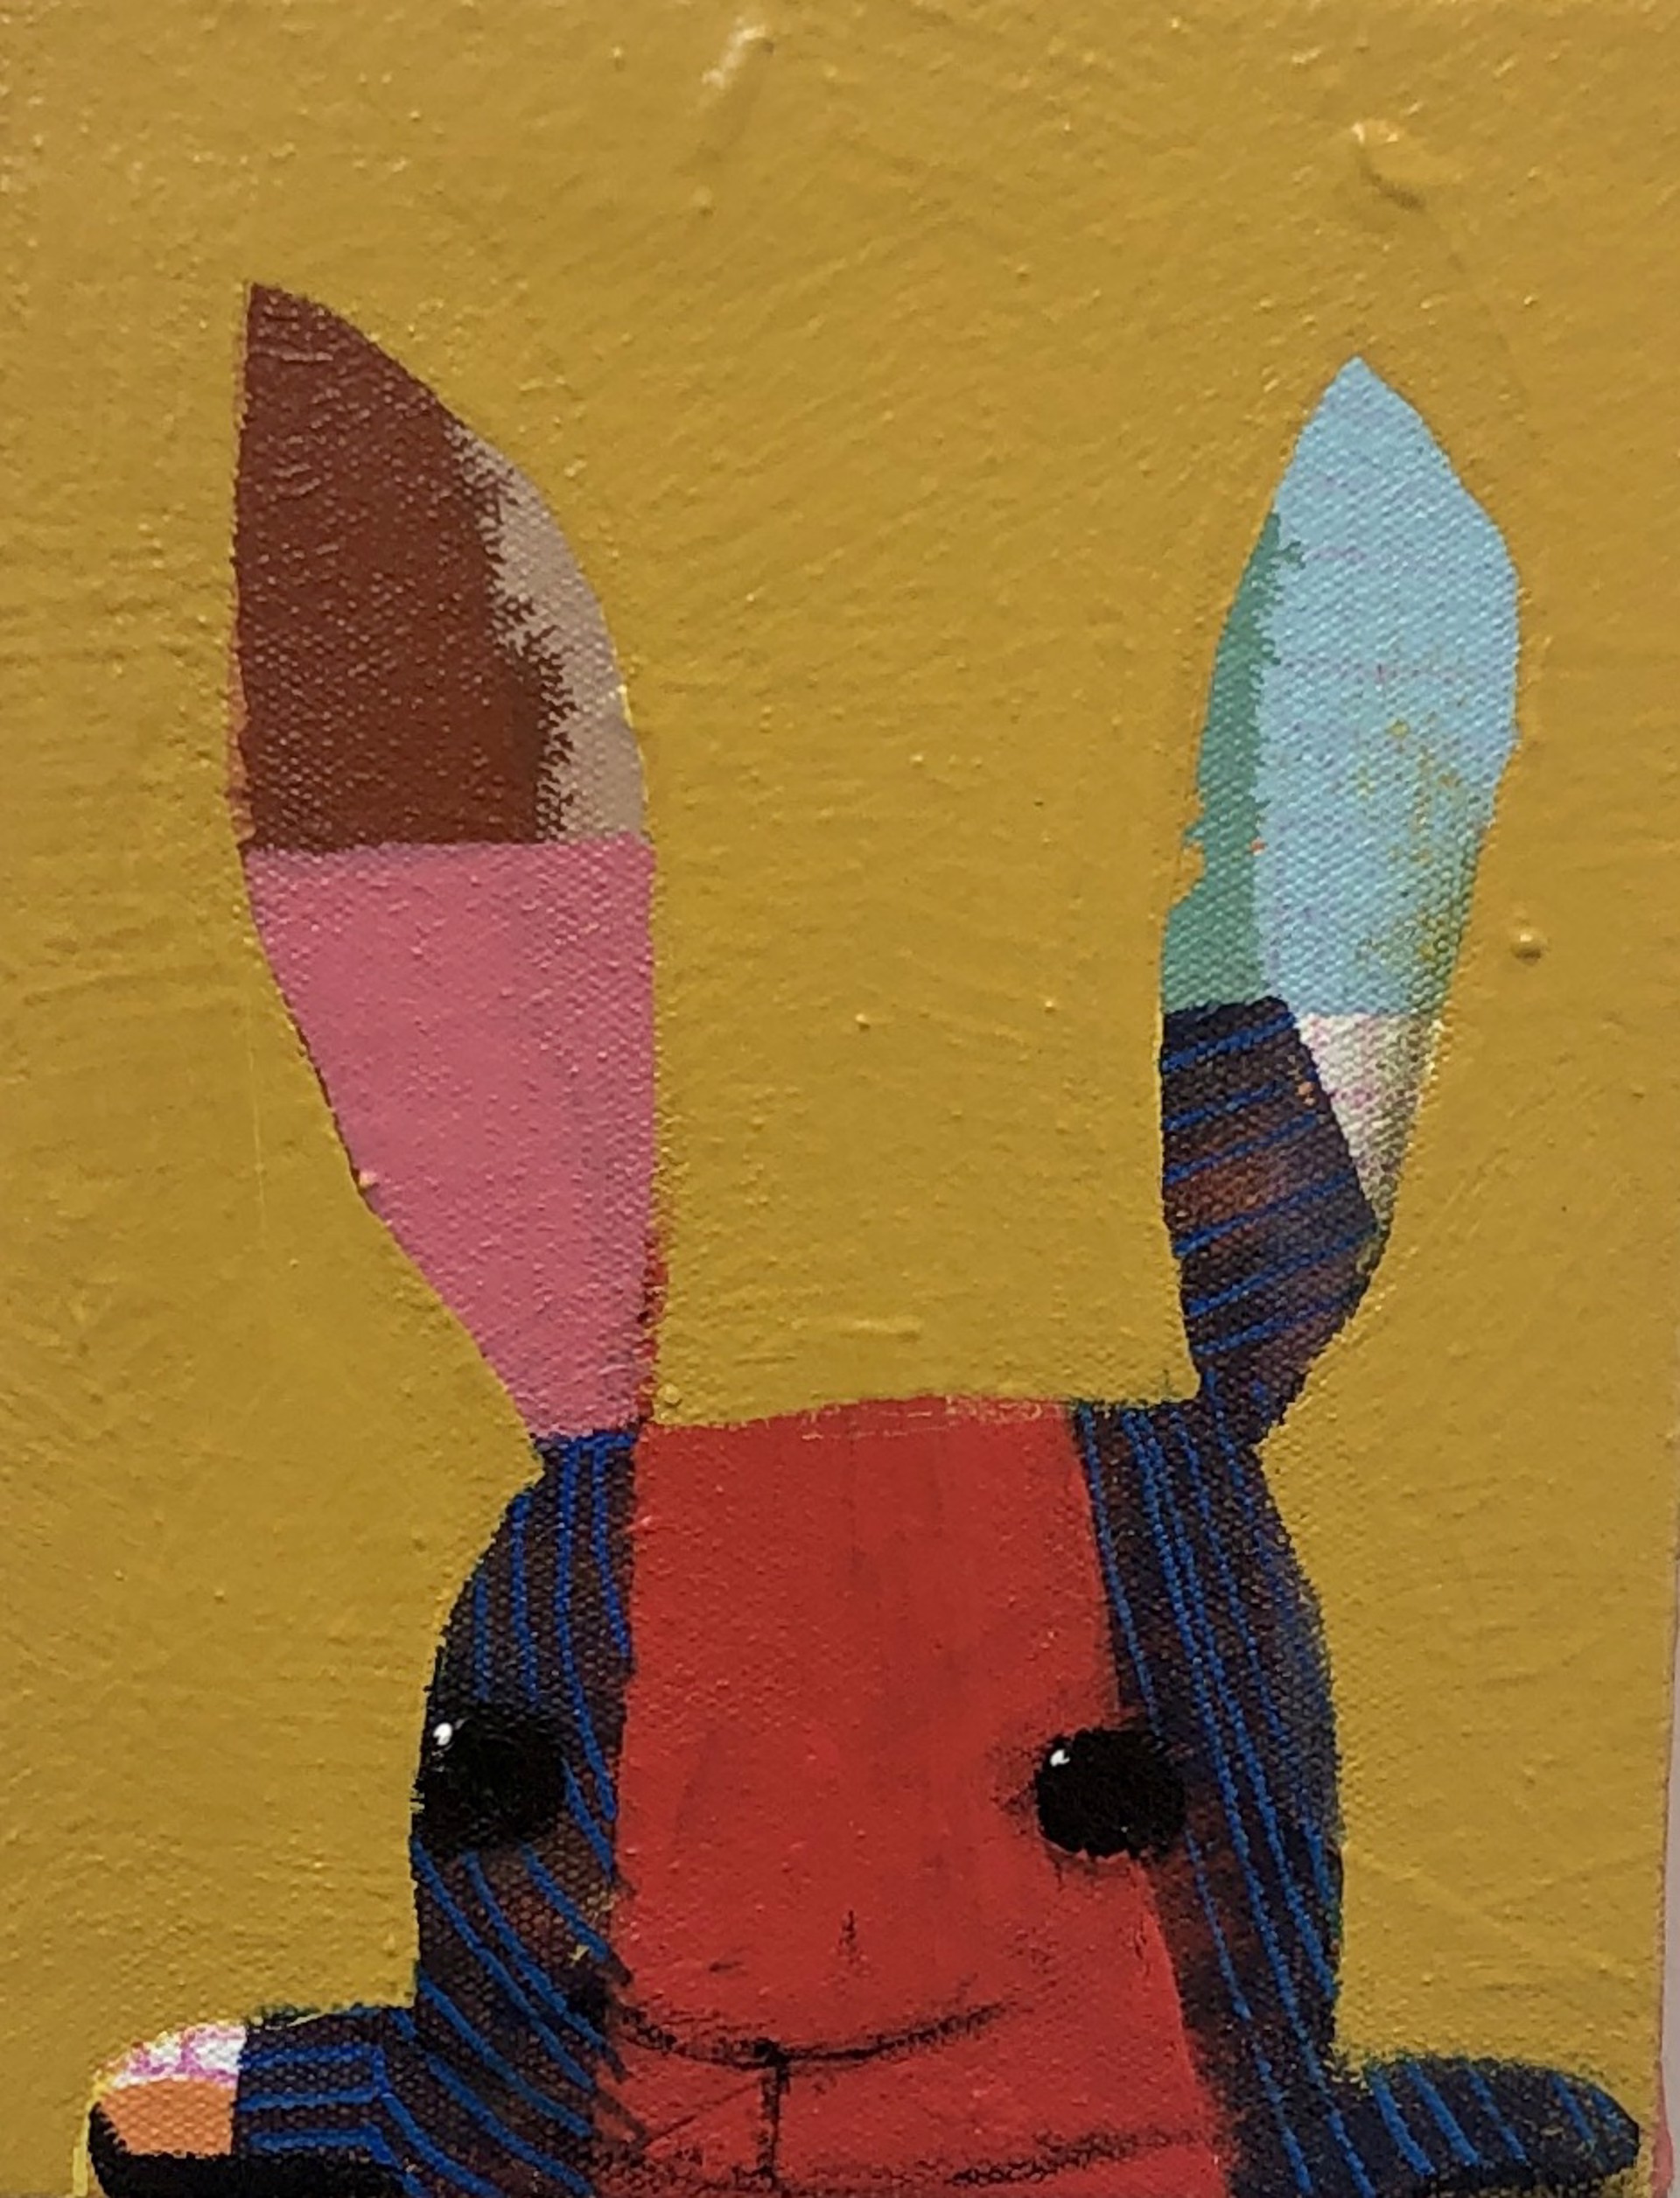 Quilted Bunny #9 by Wendeline Matson